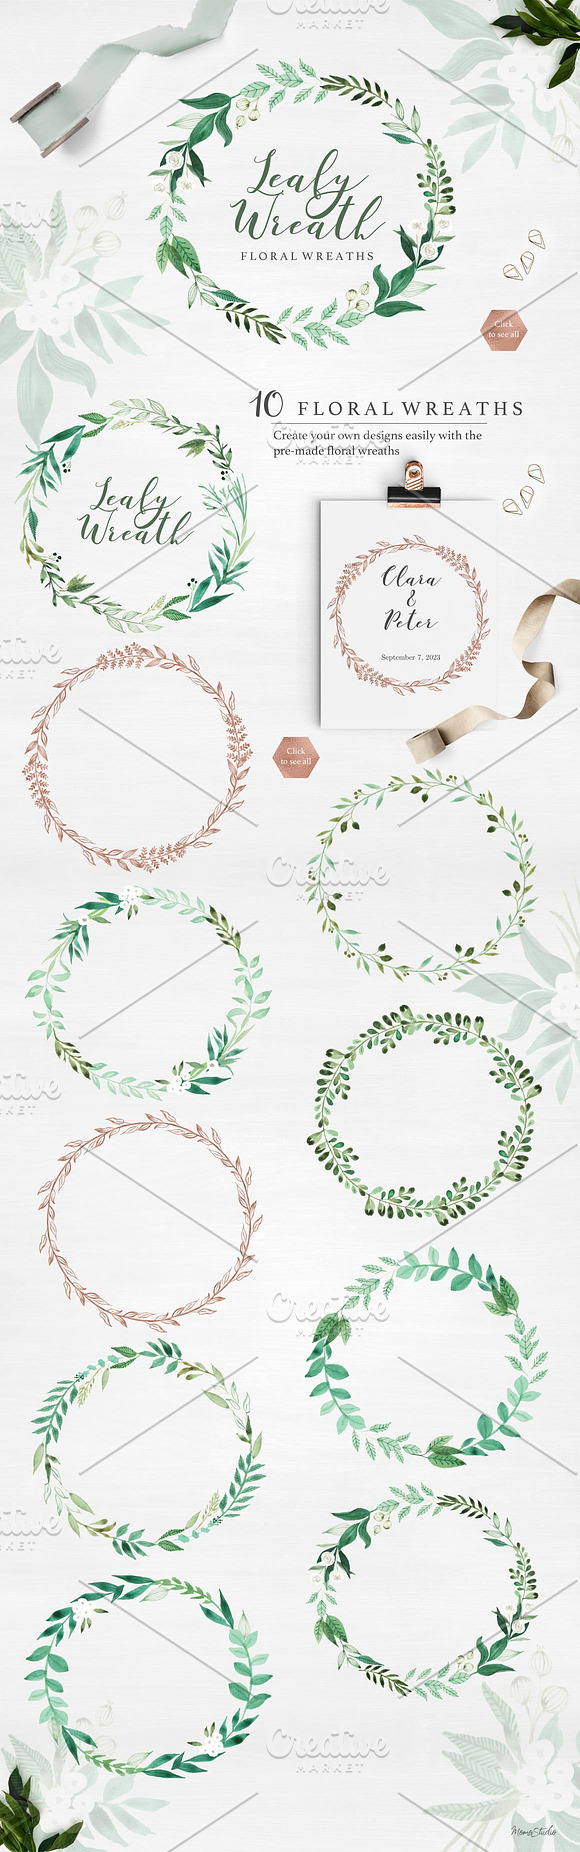 Botanist Watercolor Greenery Leaves in Illustrations - product preview 1